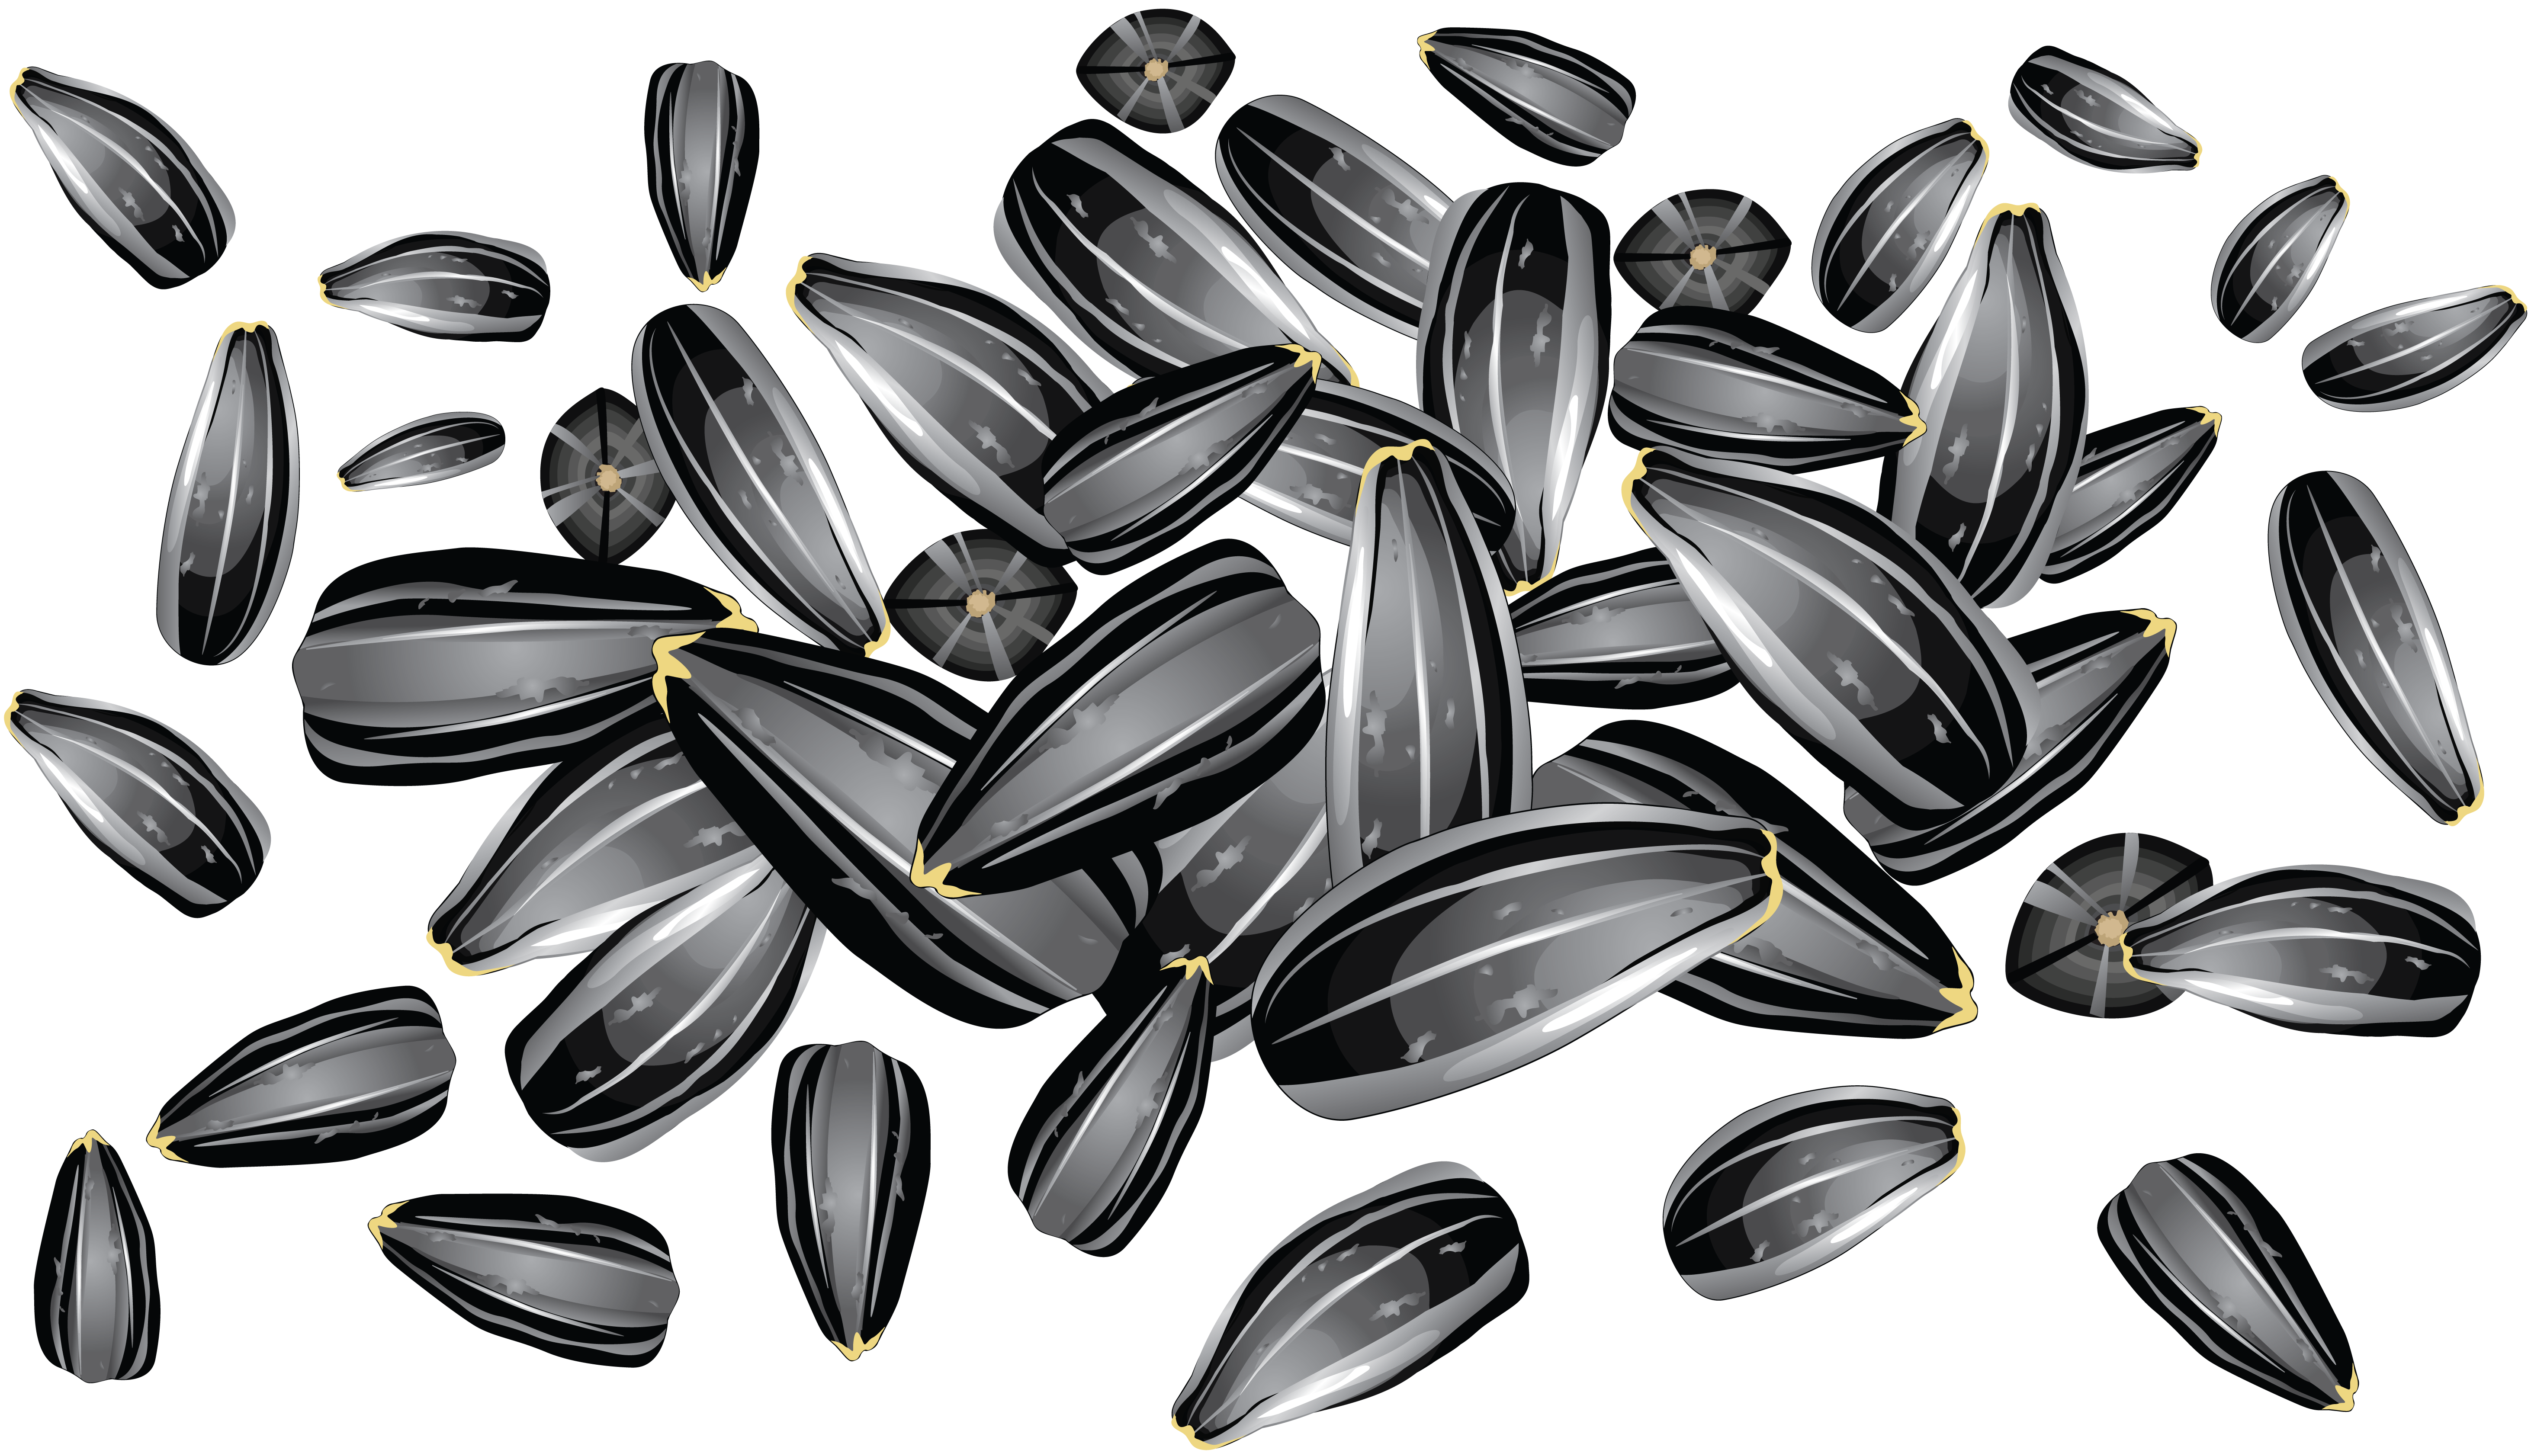 nut clipart nut seed